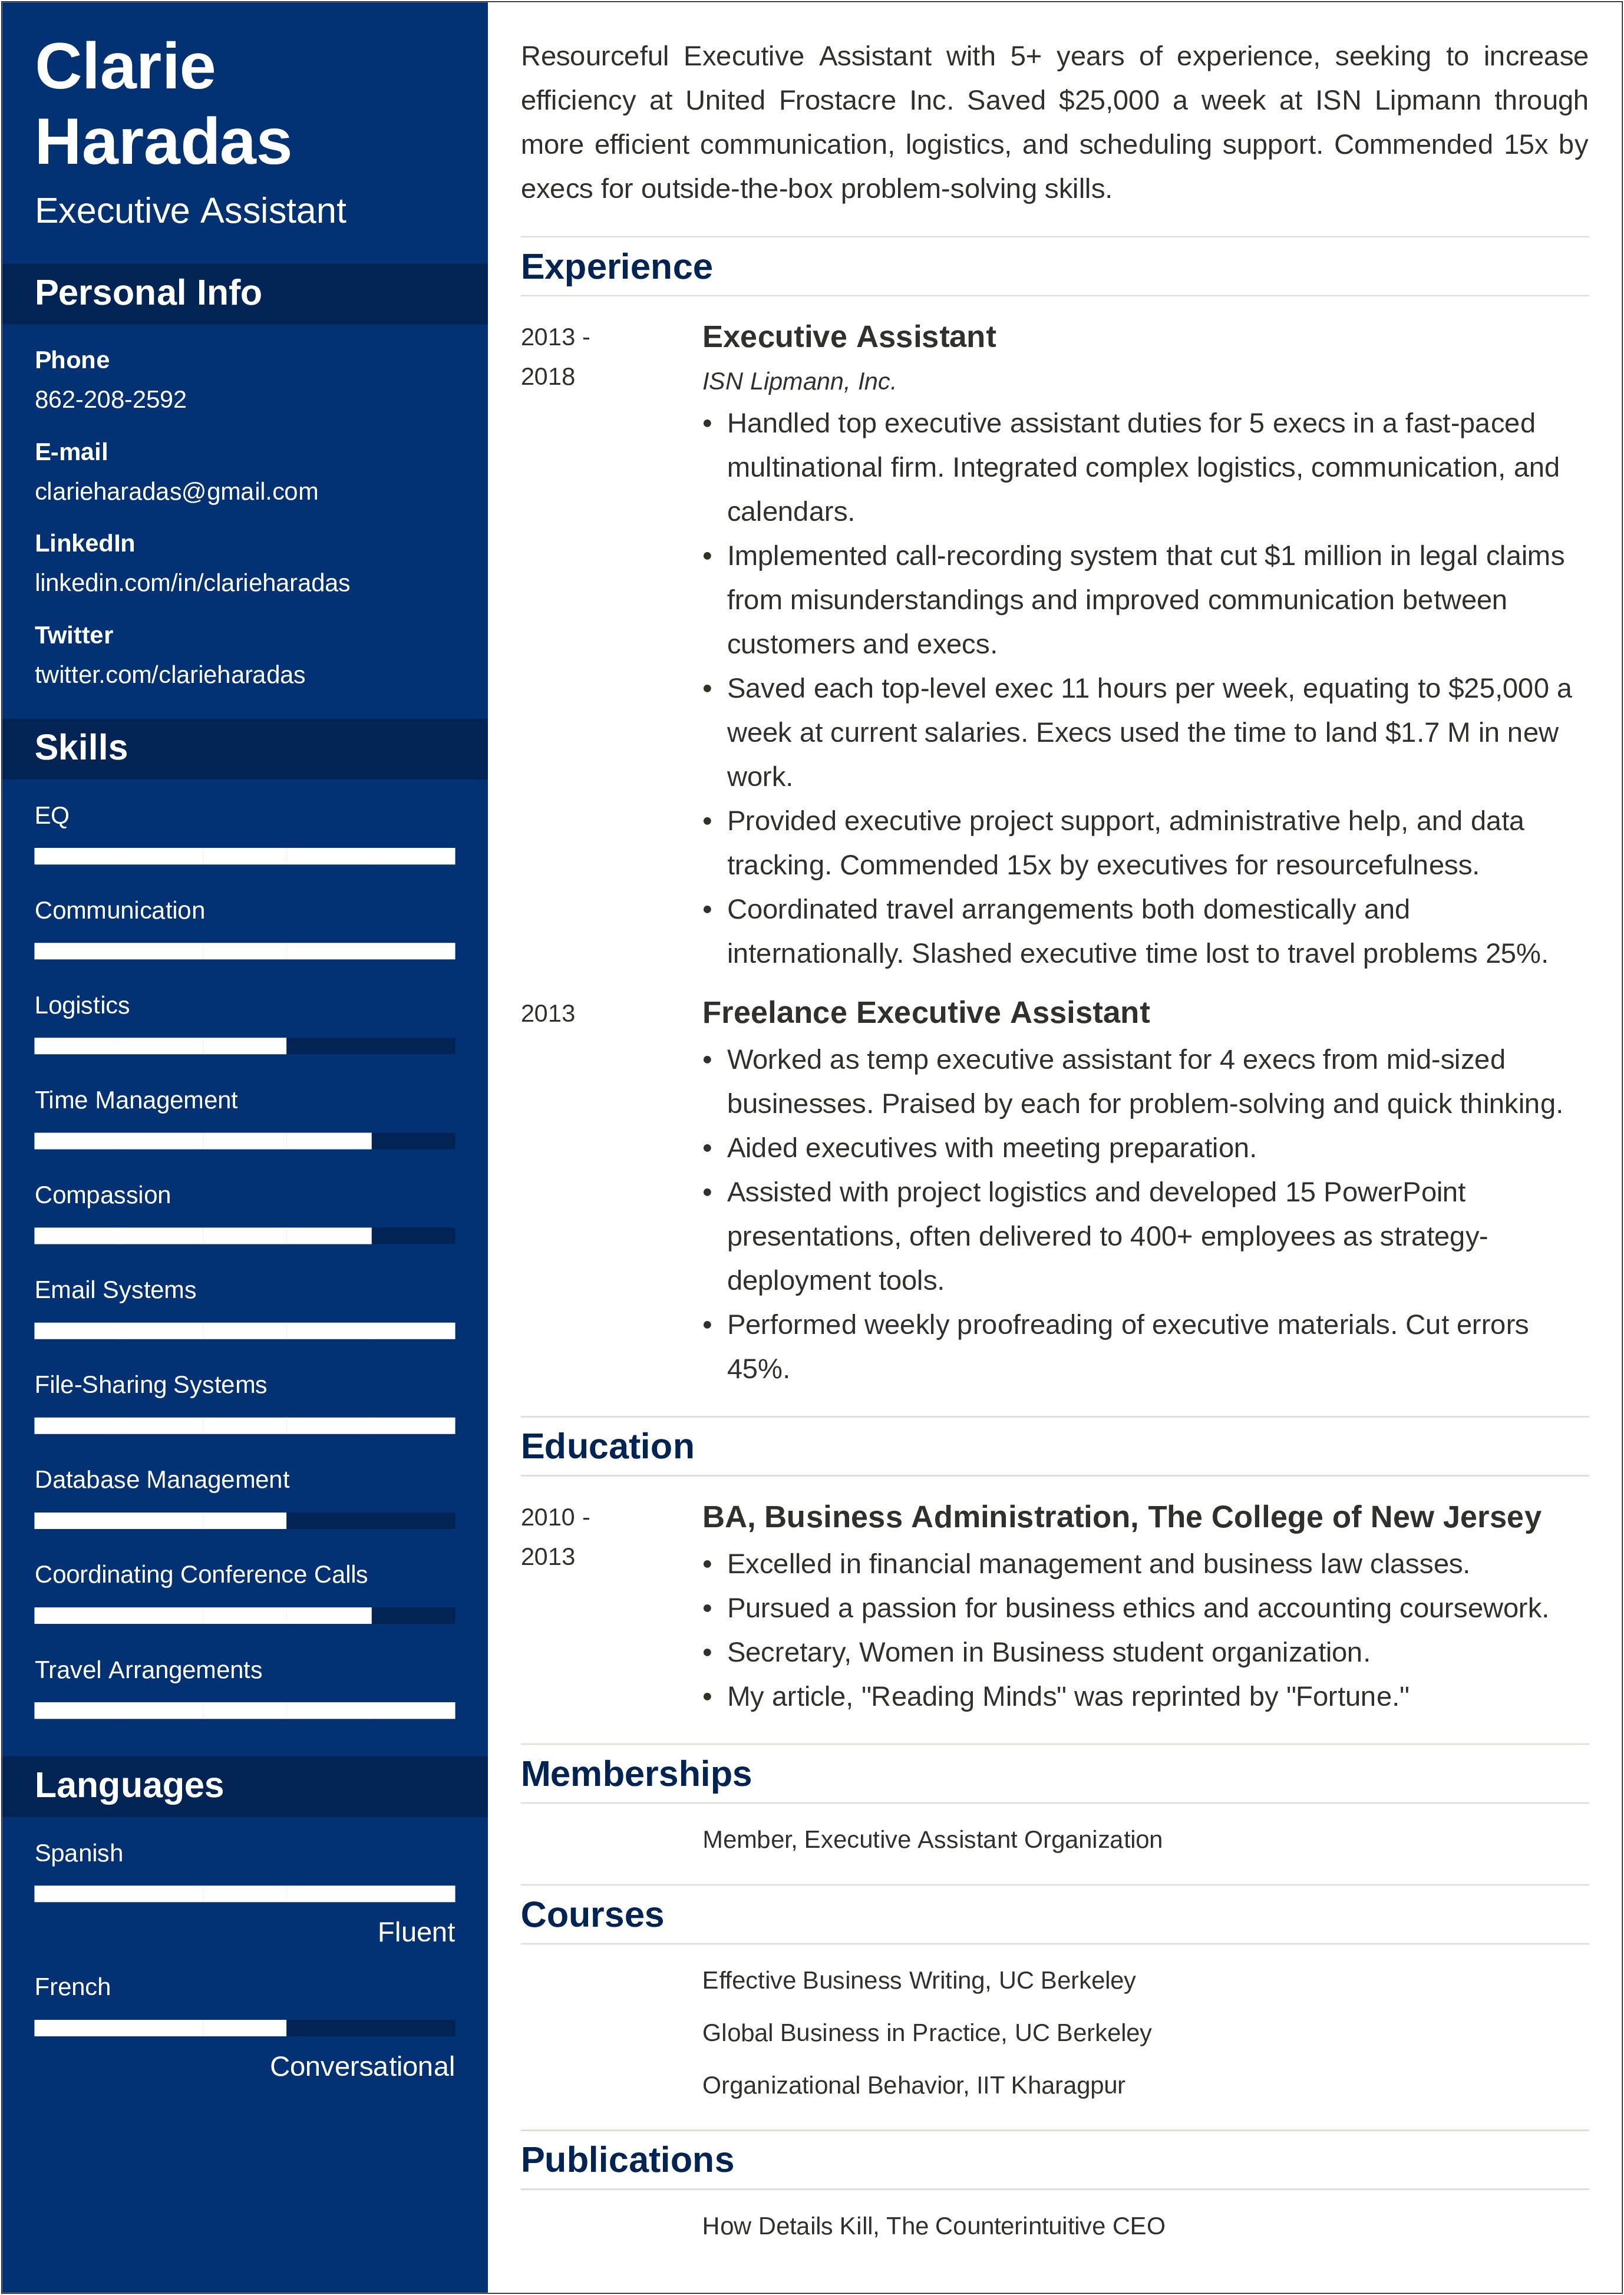 Example Of Resume To Apply Job Word